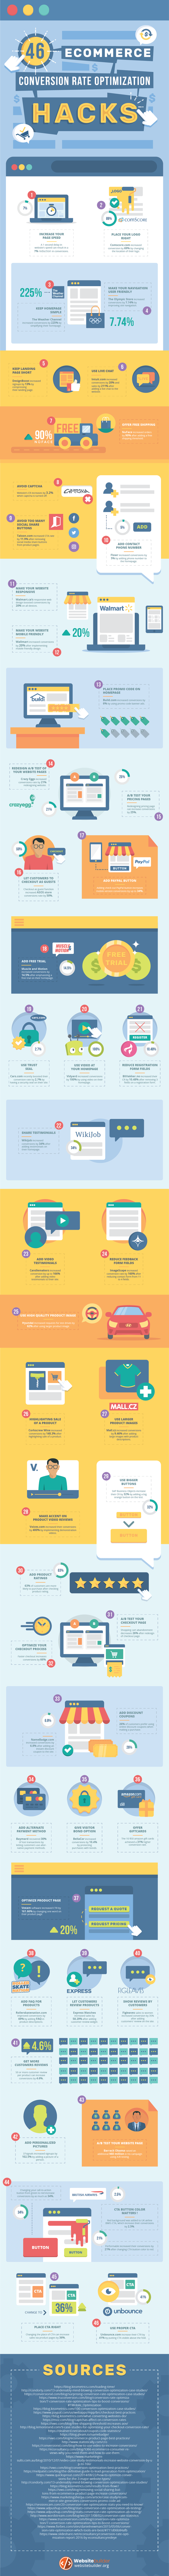 conversion rate optimization infographic